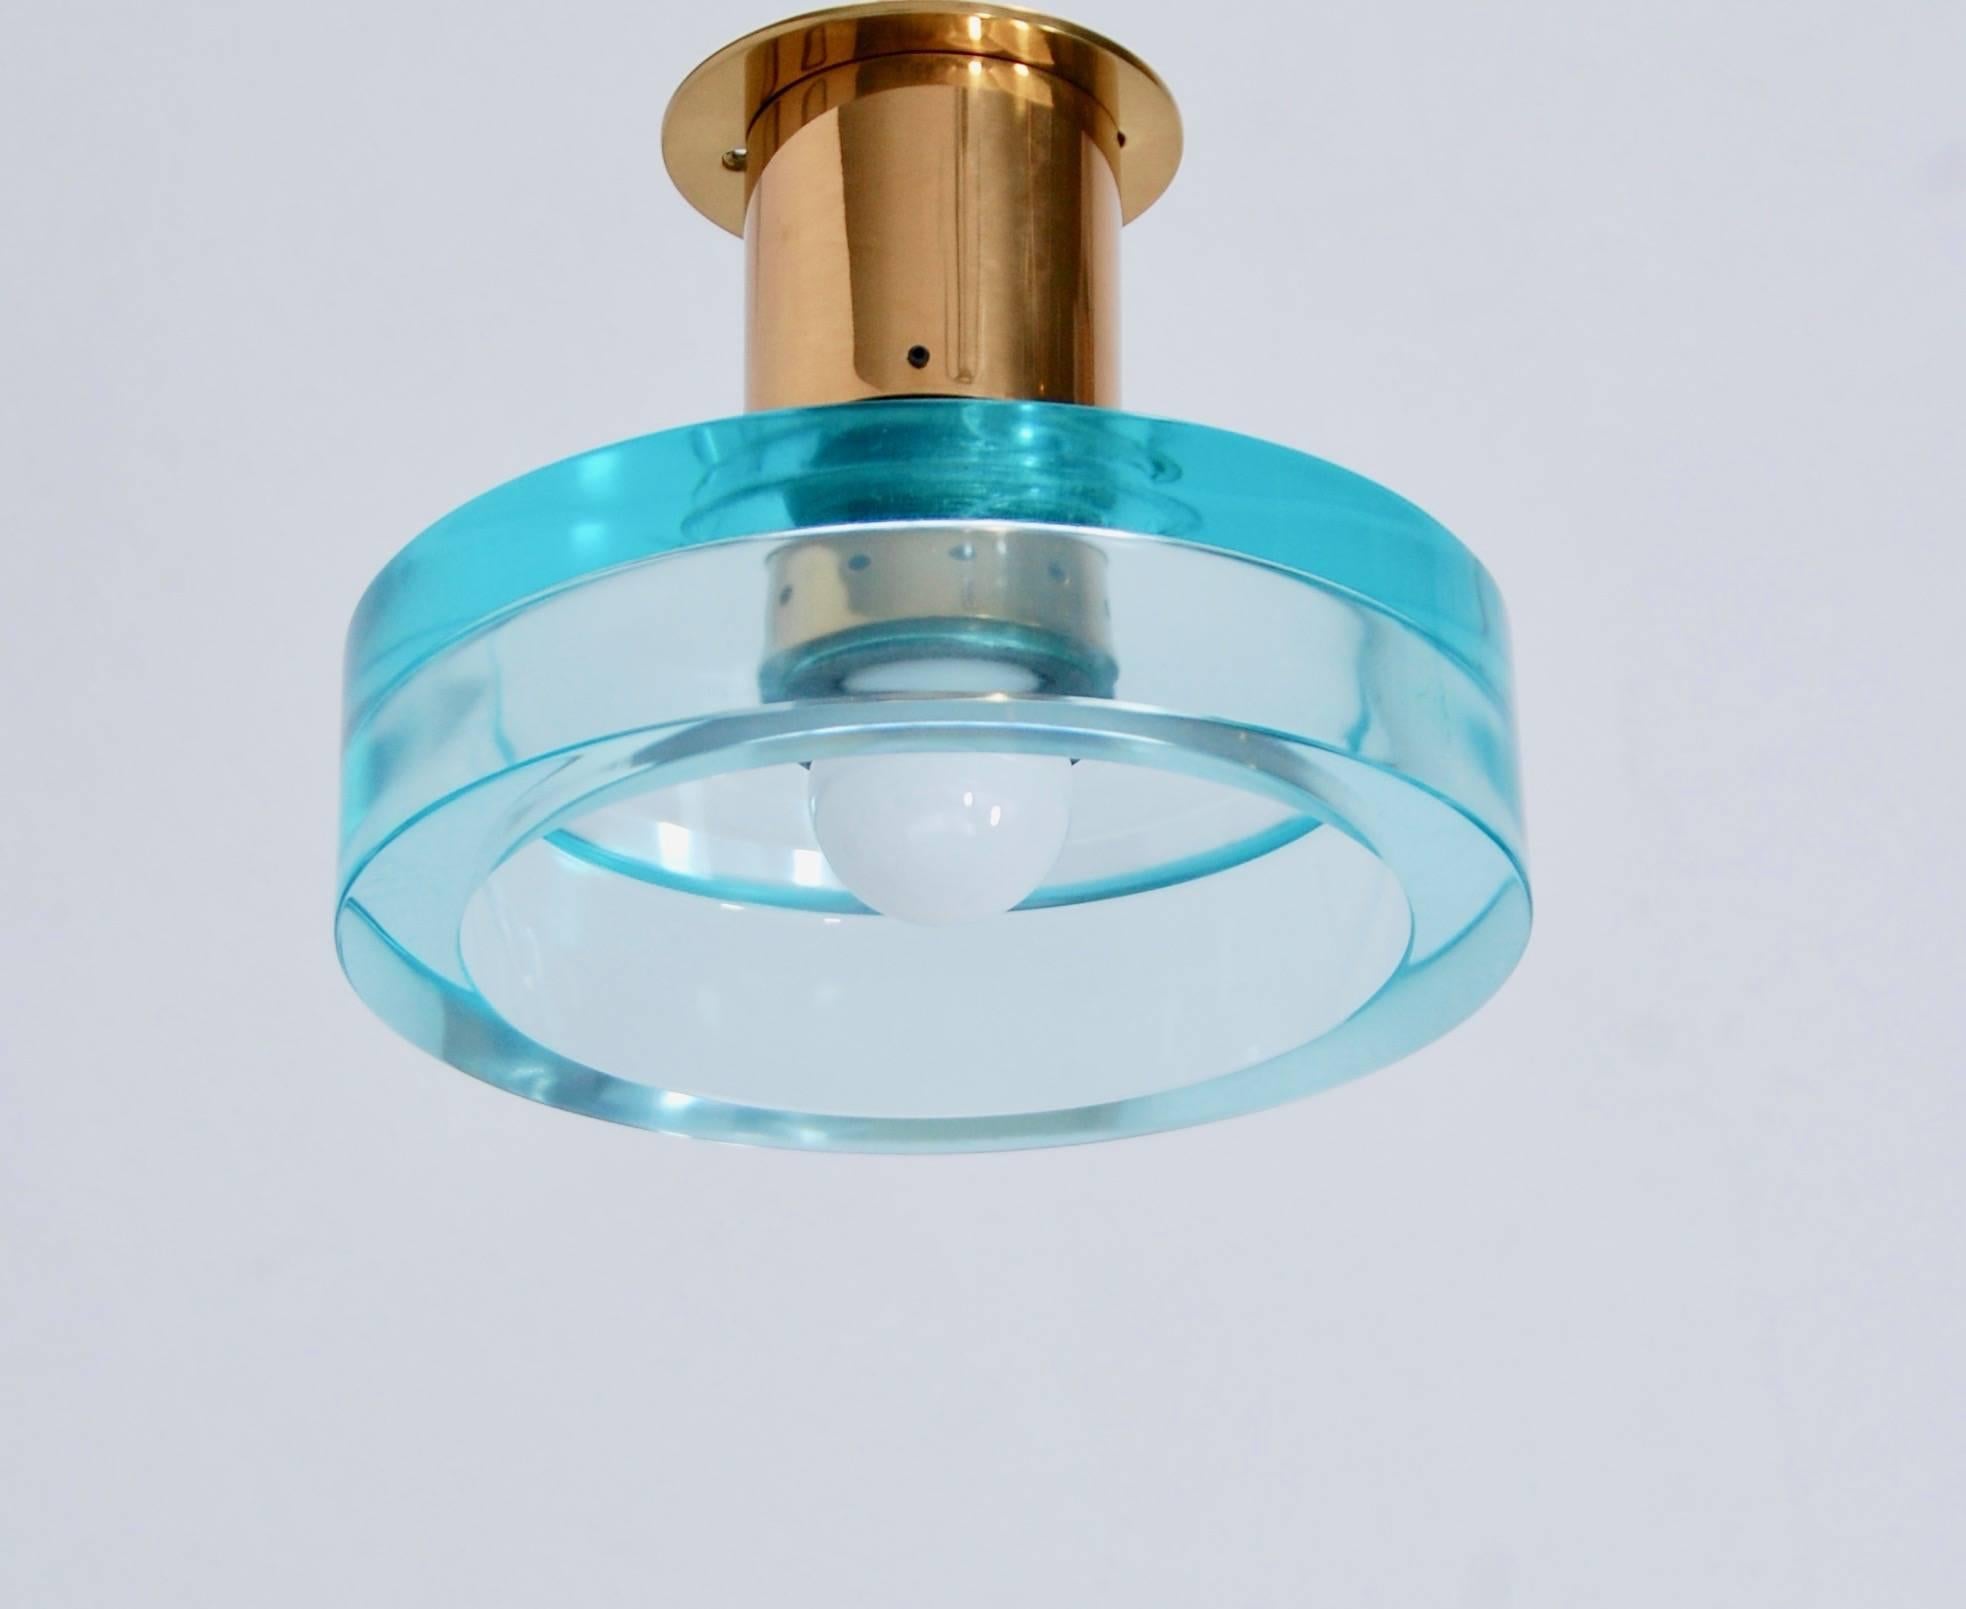 Two classical Seguso ceiling fixtures from midcentury, Italy. One in light blue, and one in dark blue. Partially restored. (1) E26 medium based socket per fixture. In patinated brass and glass.